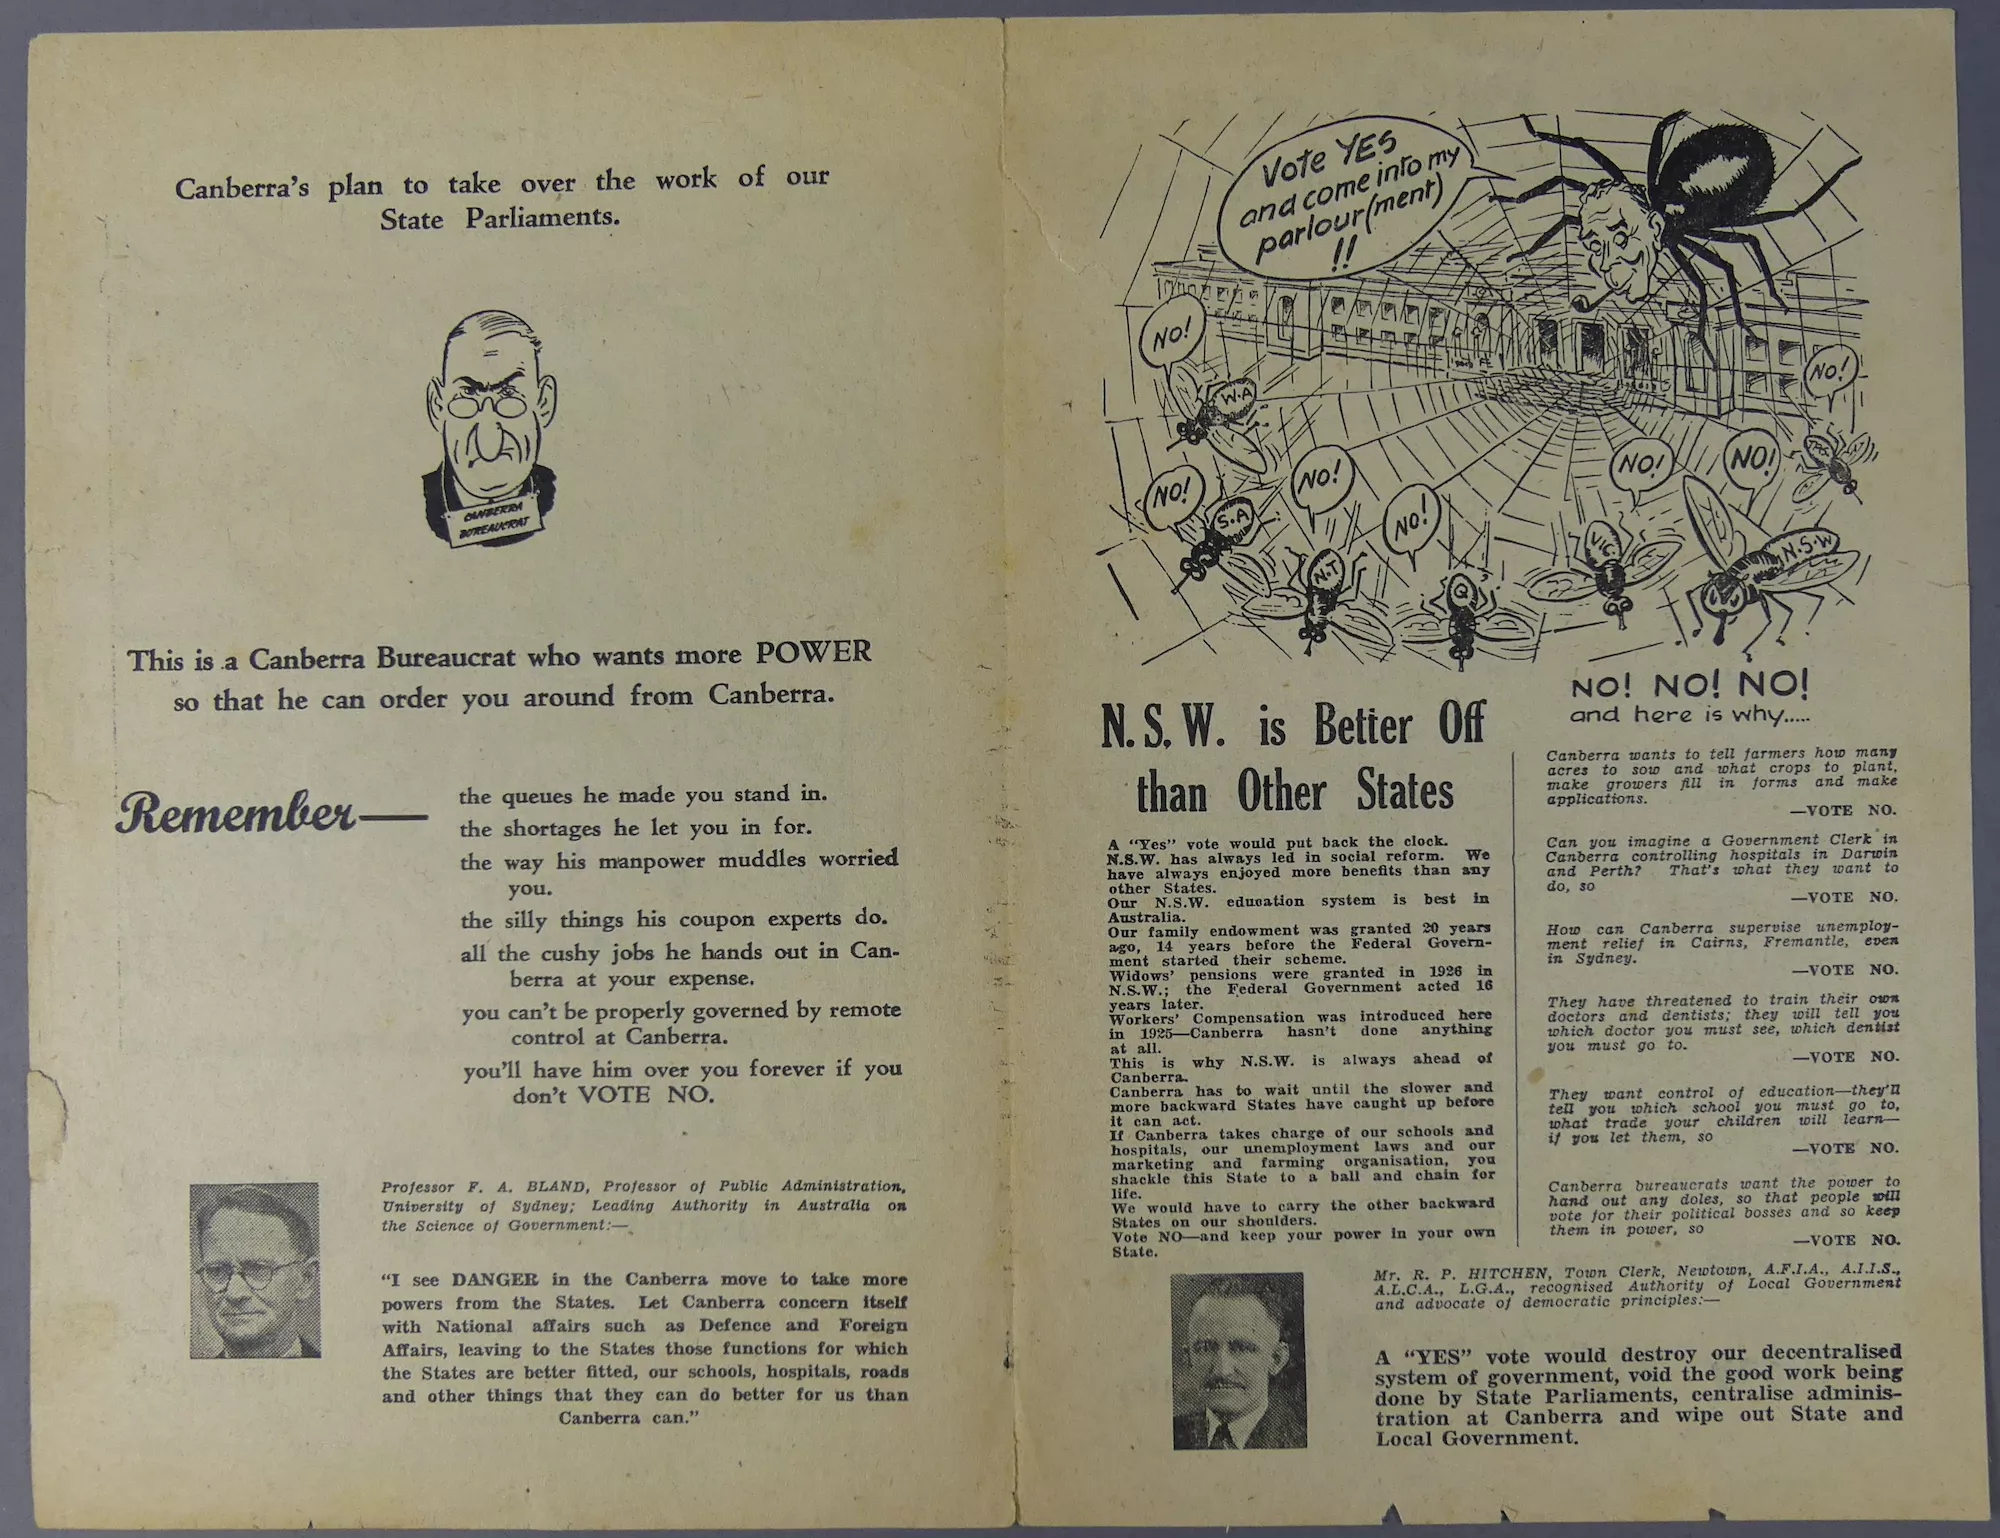 In the 1946  ‘no’ campaign pamphlet, which focused heavily on the rights of the states, Chifley was portrayed as a power-hungry villain and a spider.